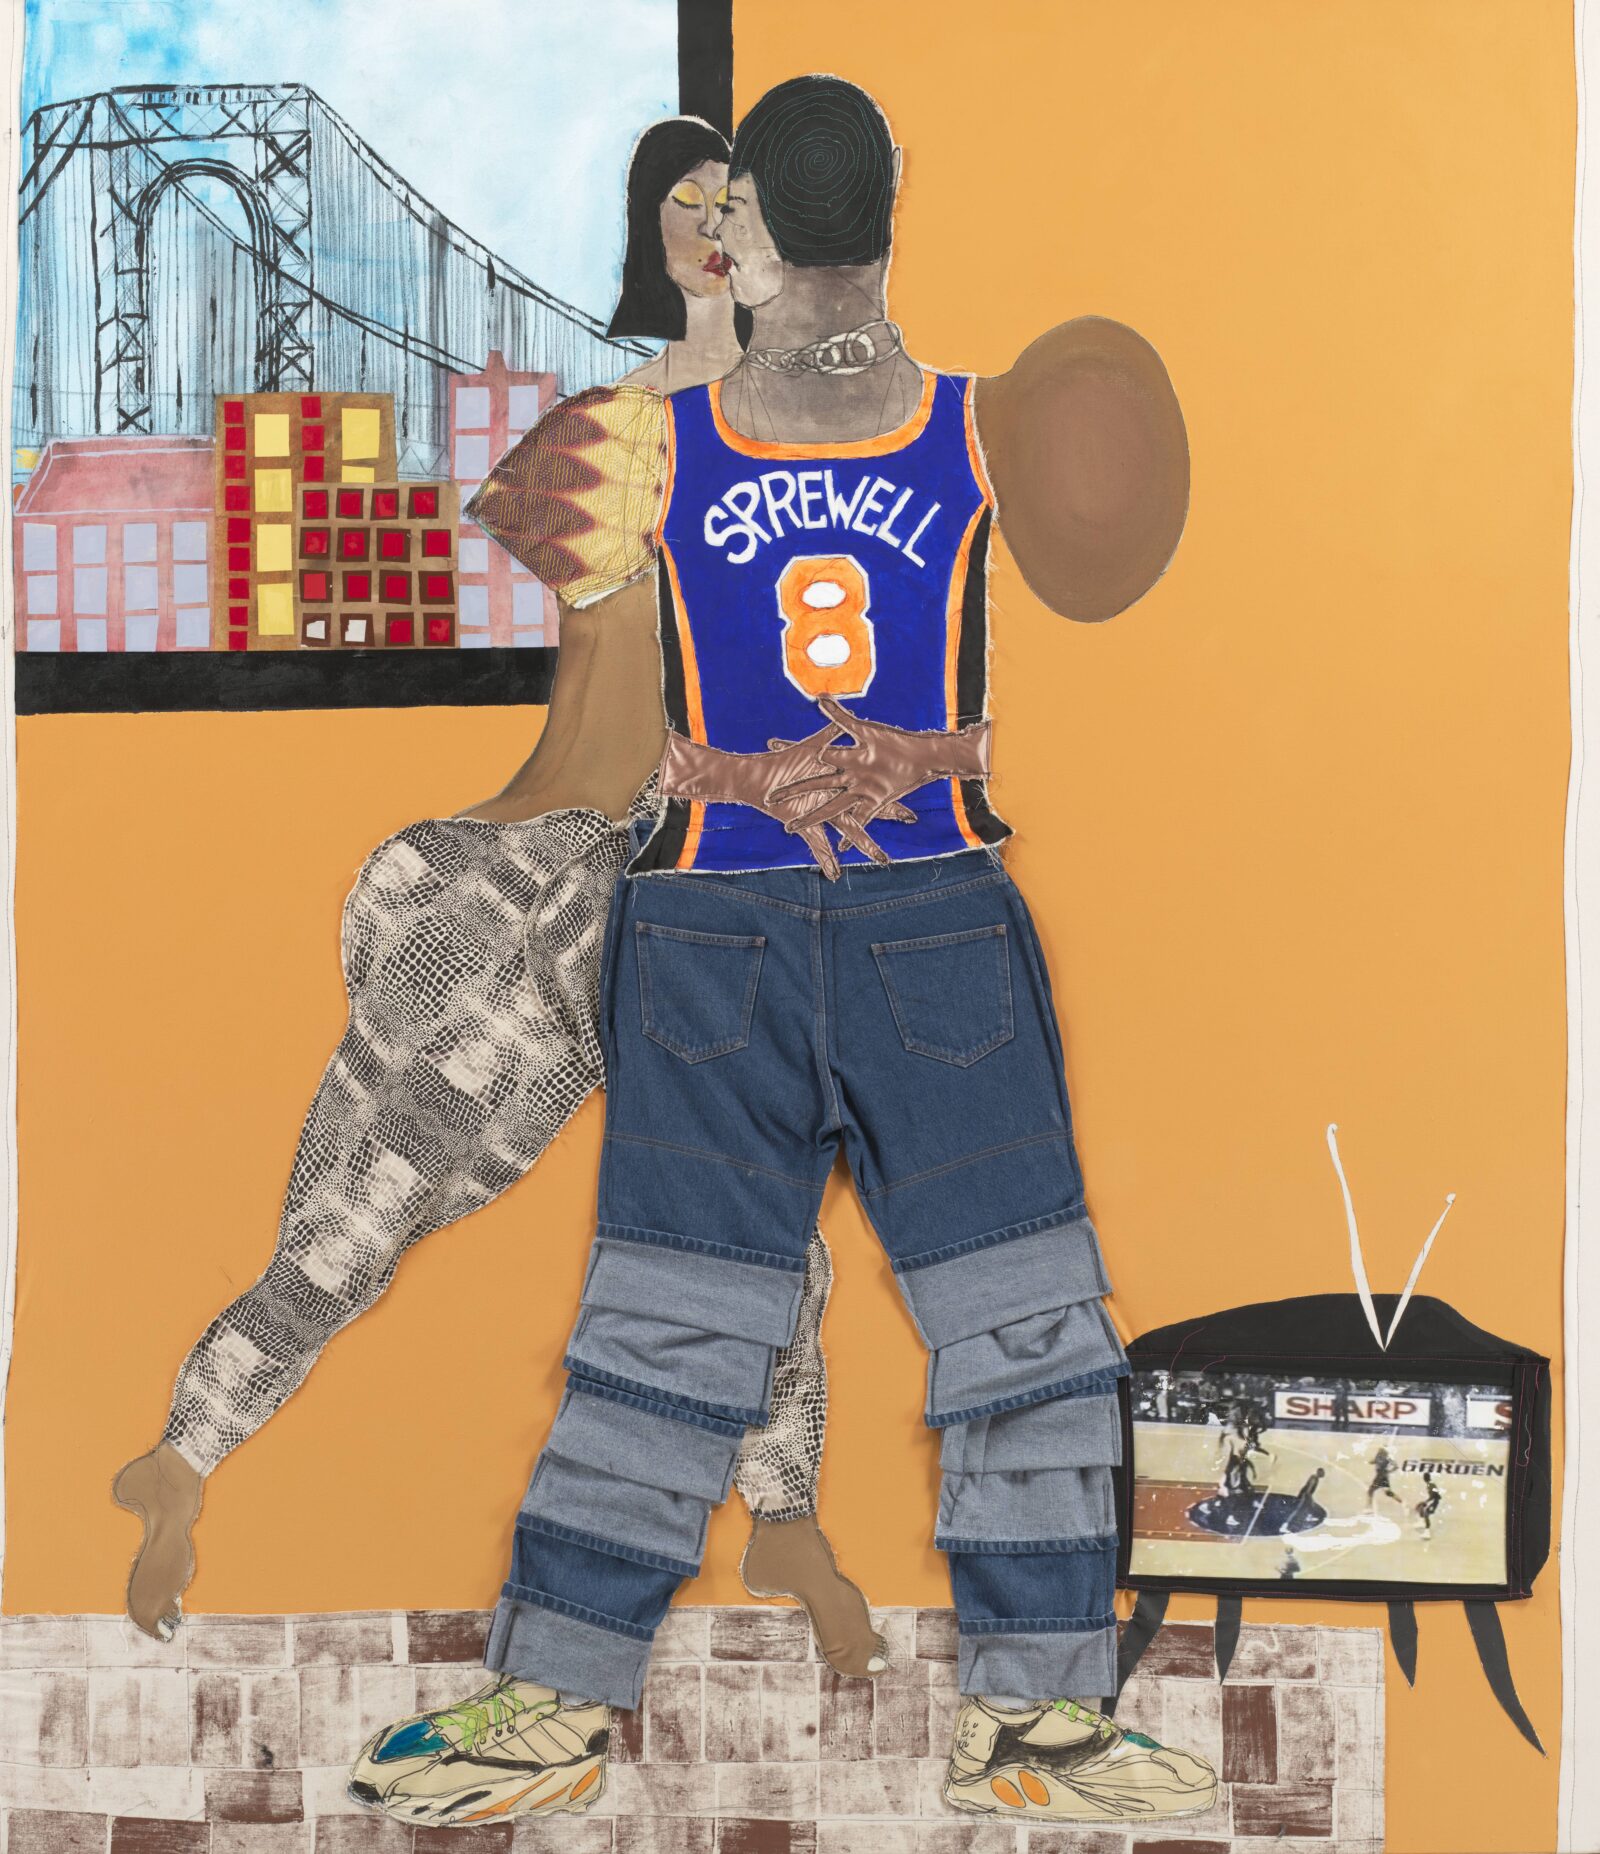 Tschabalala Self, Sprewell, 2020, fabric, thread, painted canvas, silk, jeans, painted newsprint, stamp, photographic transfer on paper, and acrylic on canvas, Solomon R. Guggenheim Museum, New York, gift, image courtesy of the artist; Pilar Corrias, London; and Galerie Eva Presenhuber, Zurich. © Tschabalala Self